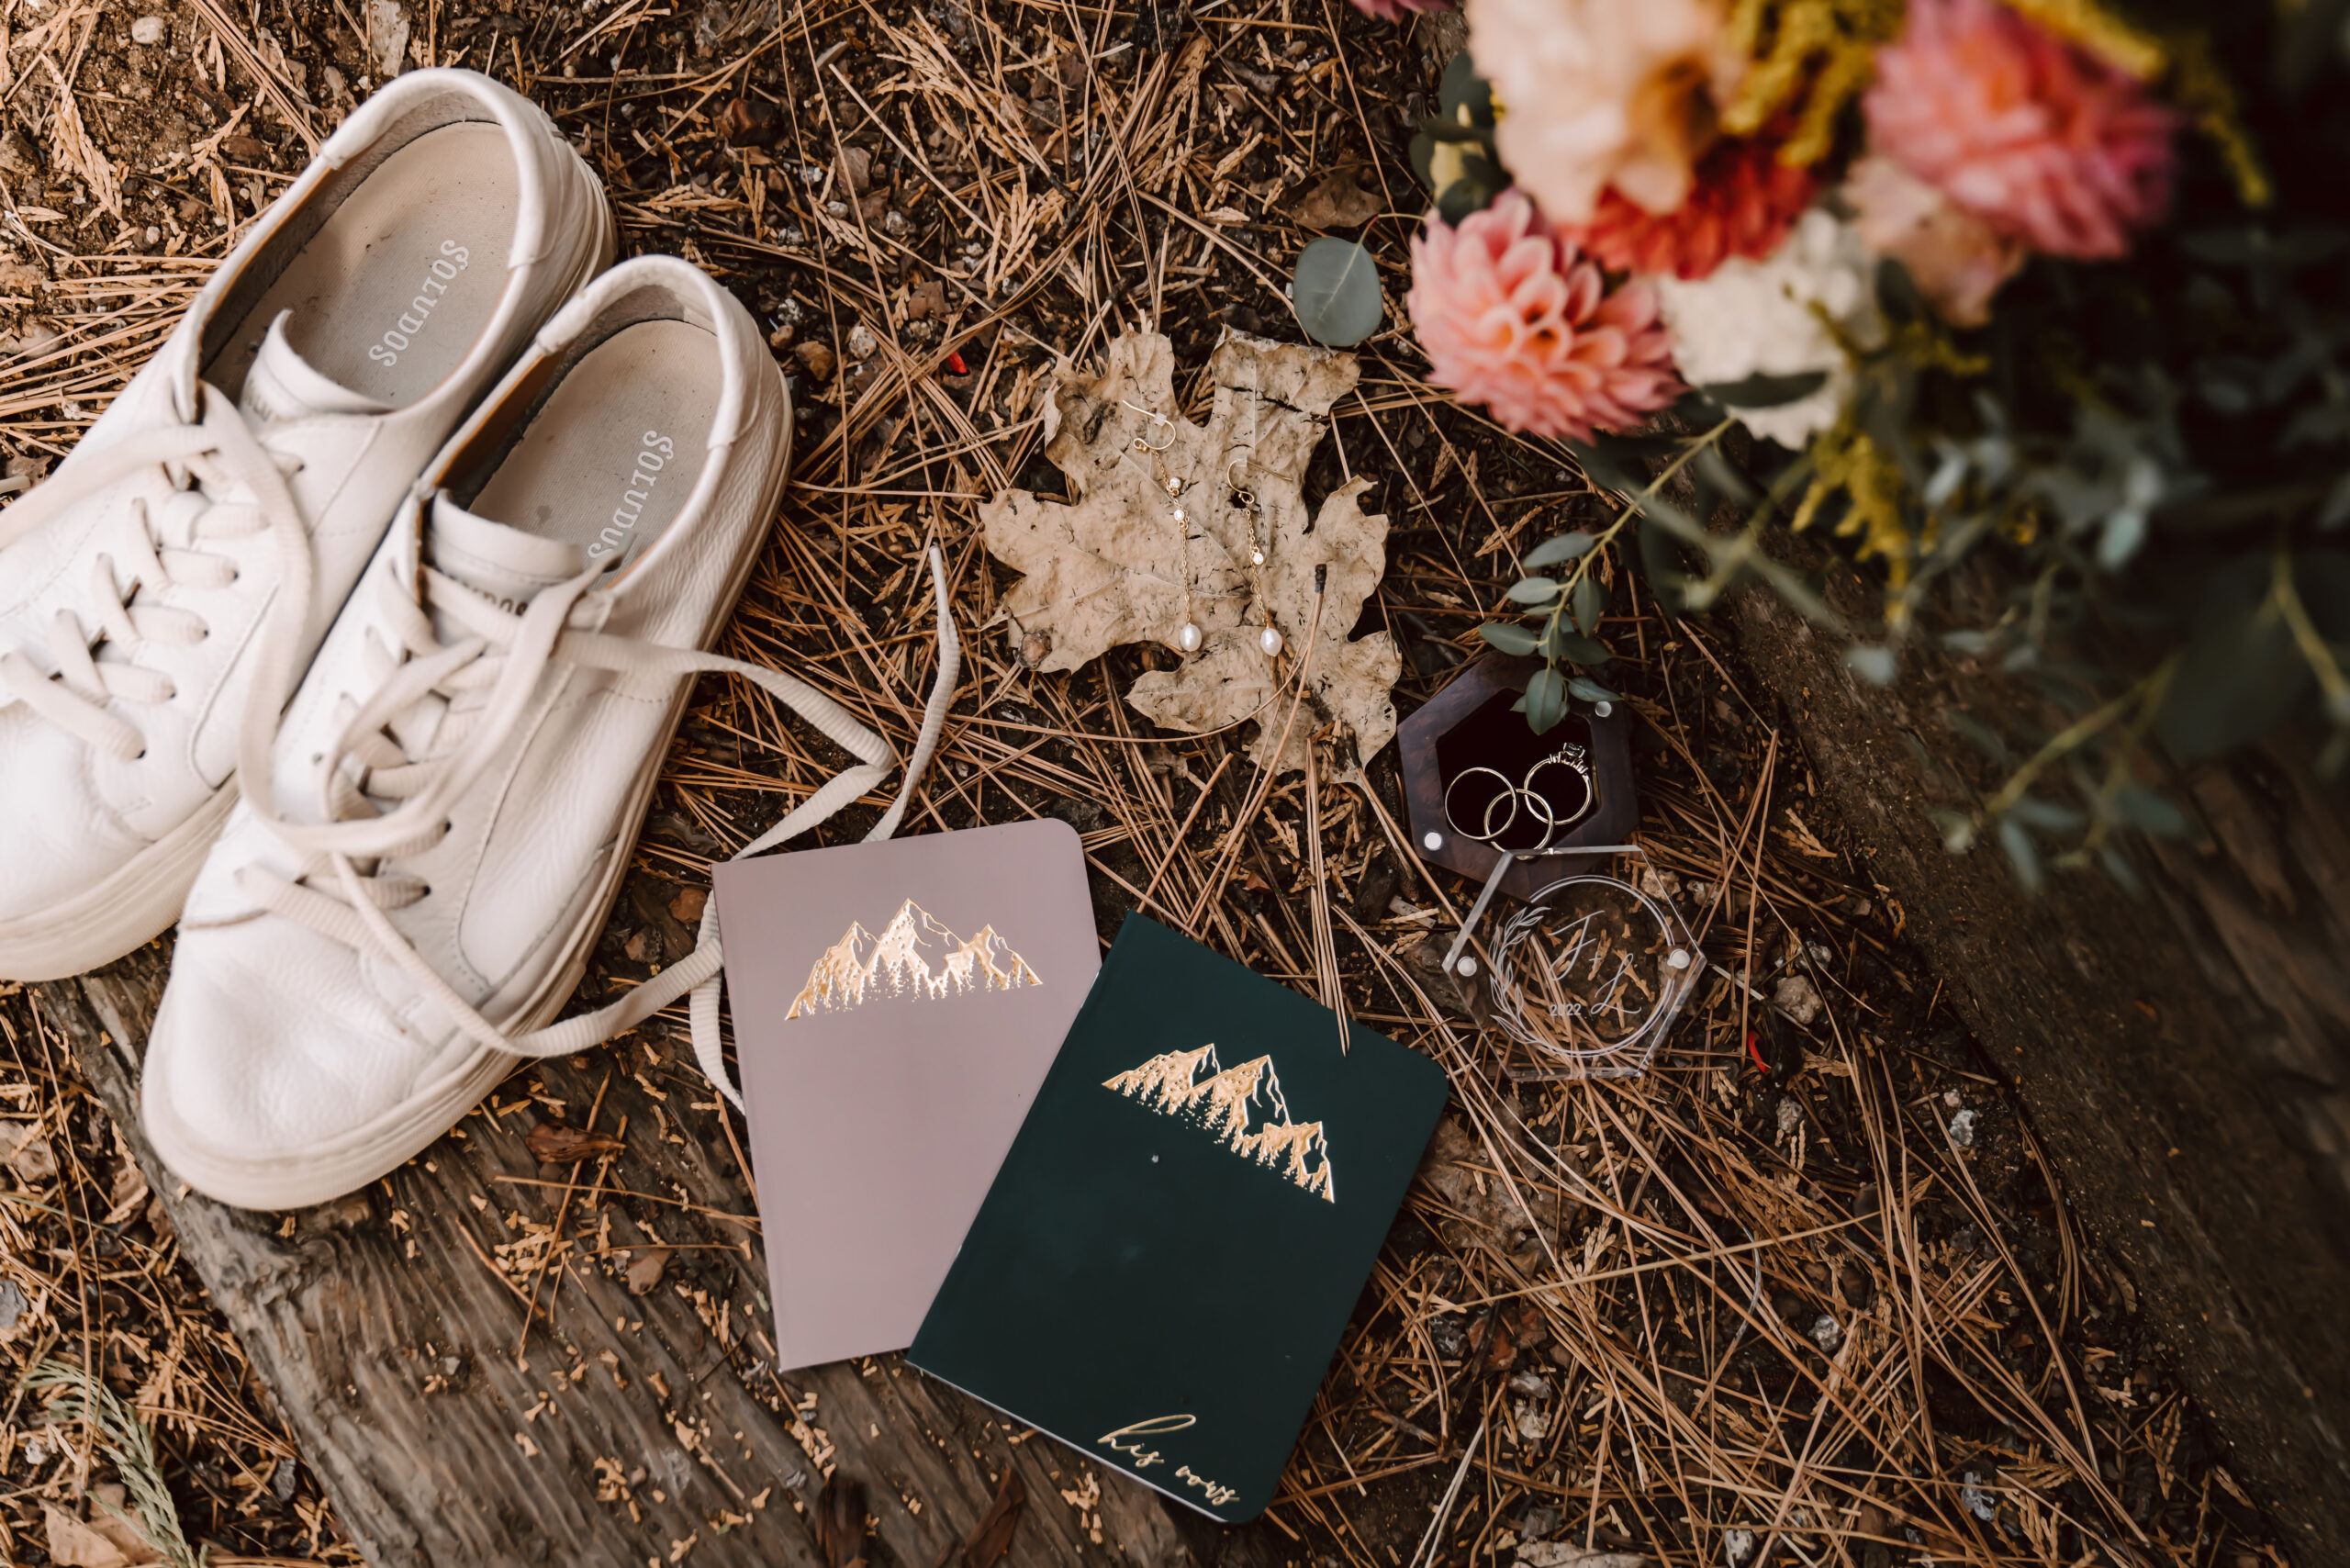 elopement details like rings, vow books, bouquet and hiking boots